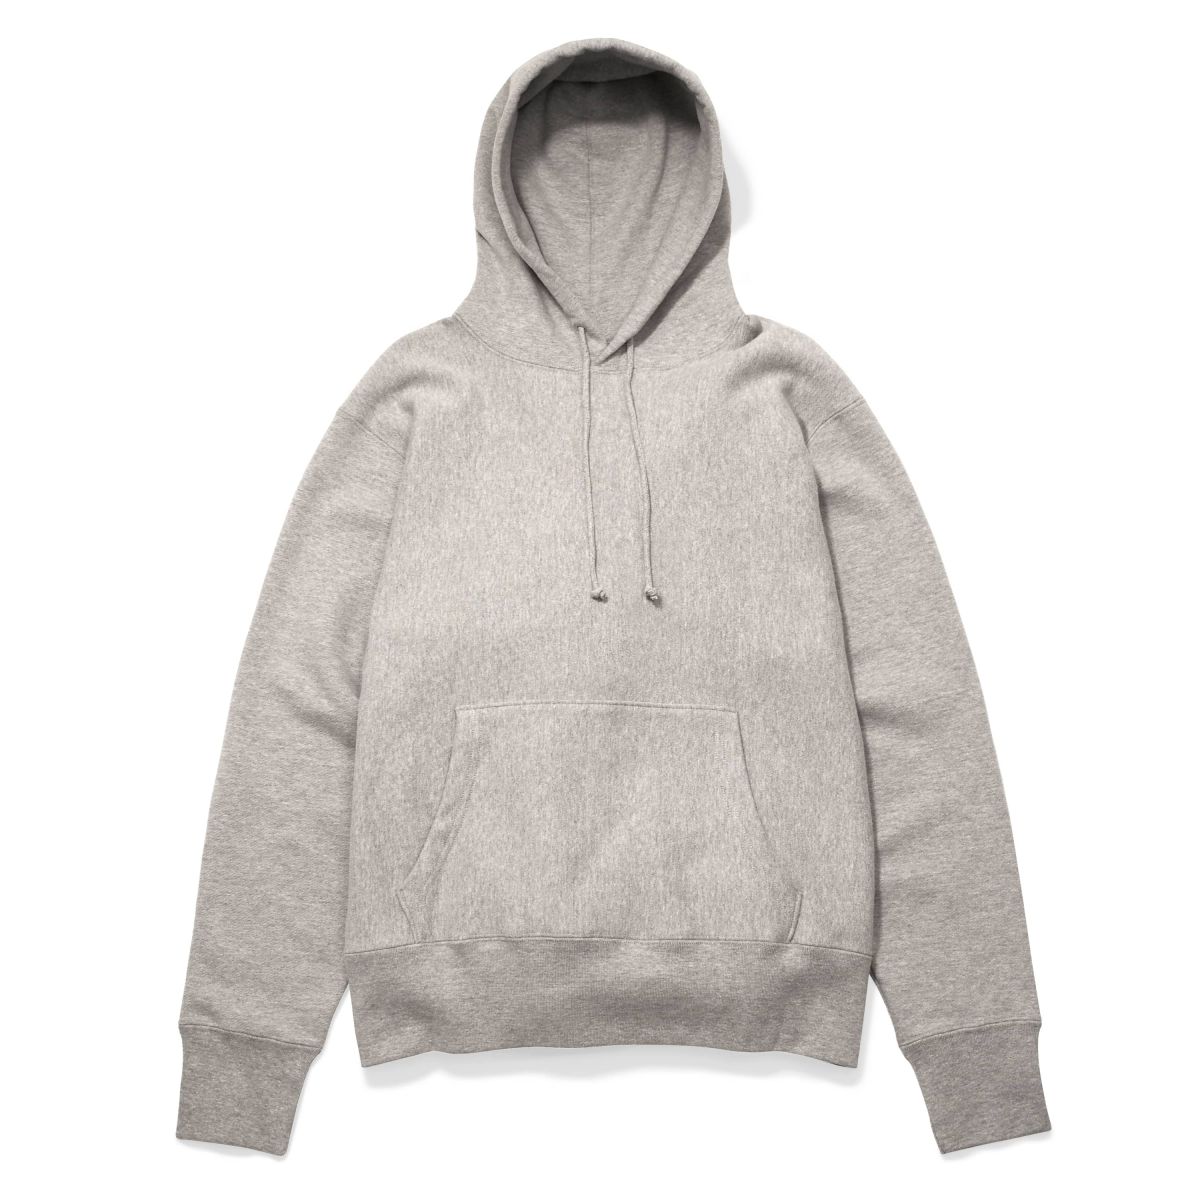 Relaxed Fit Pullover Hooded Sweatshirt